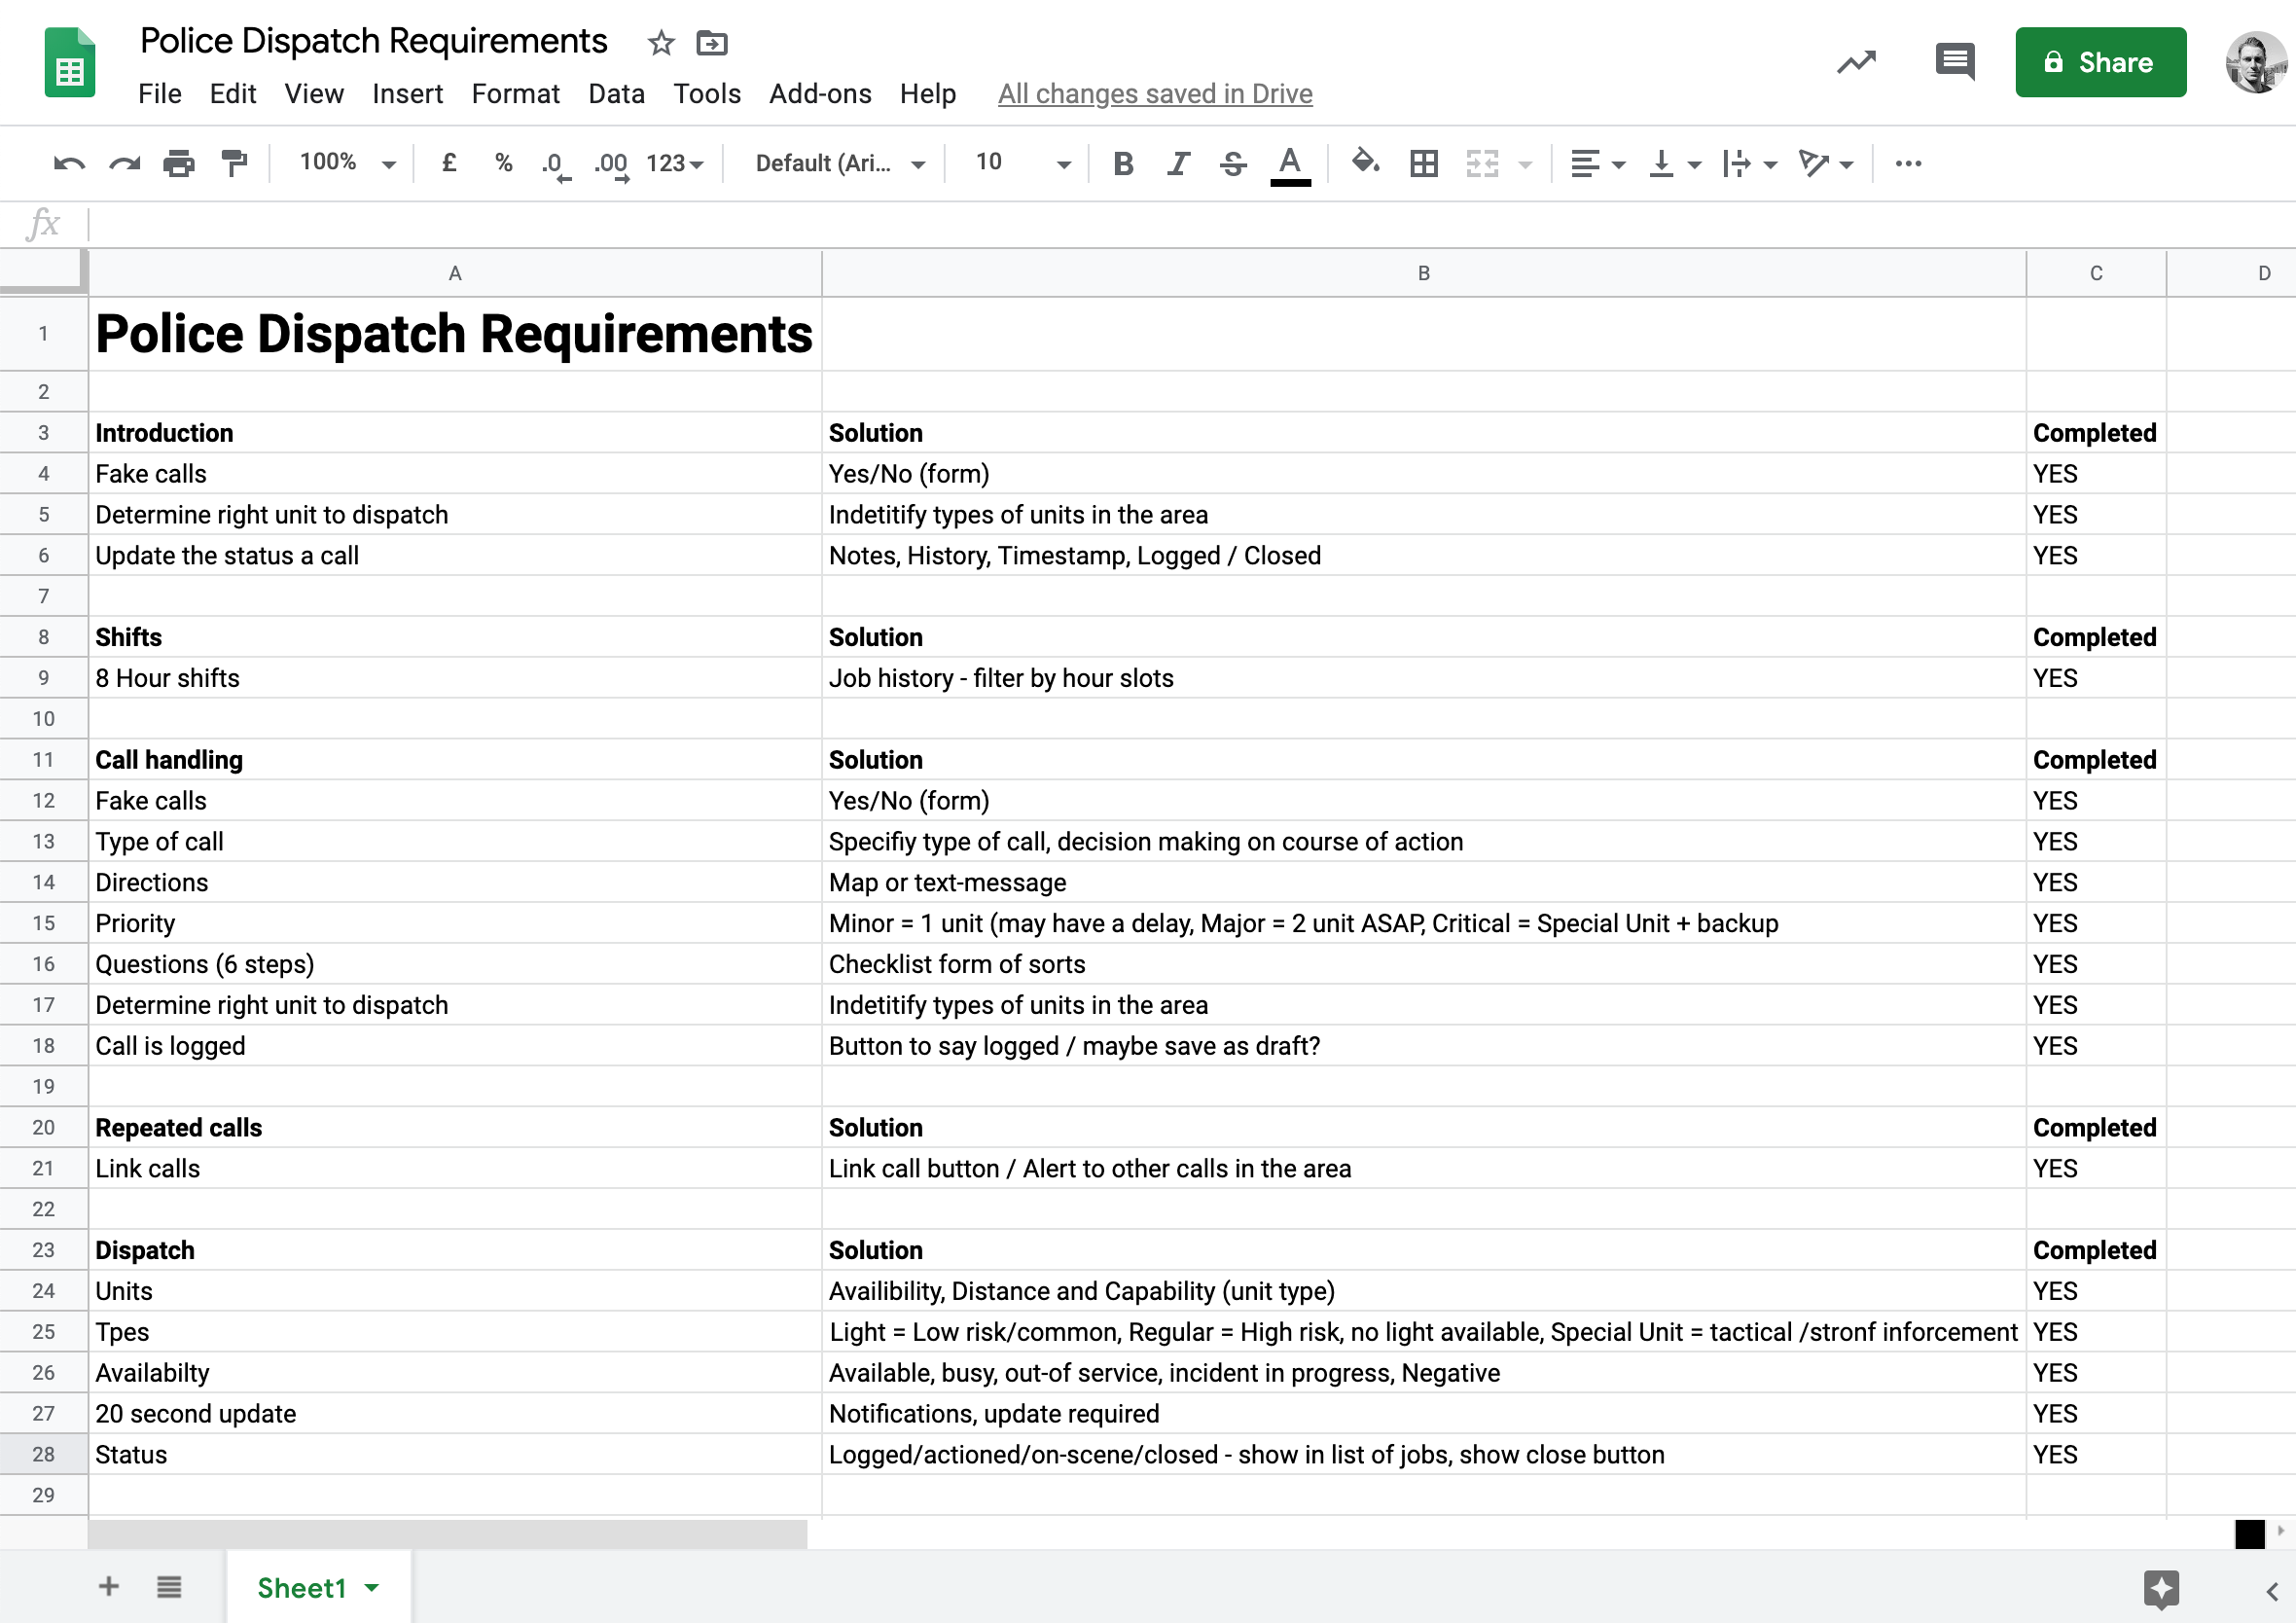 Police Dispatch requirements spreadsheet